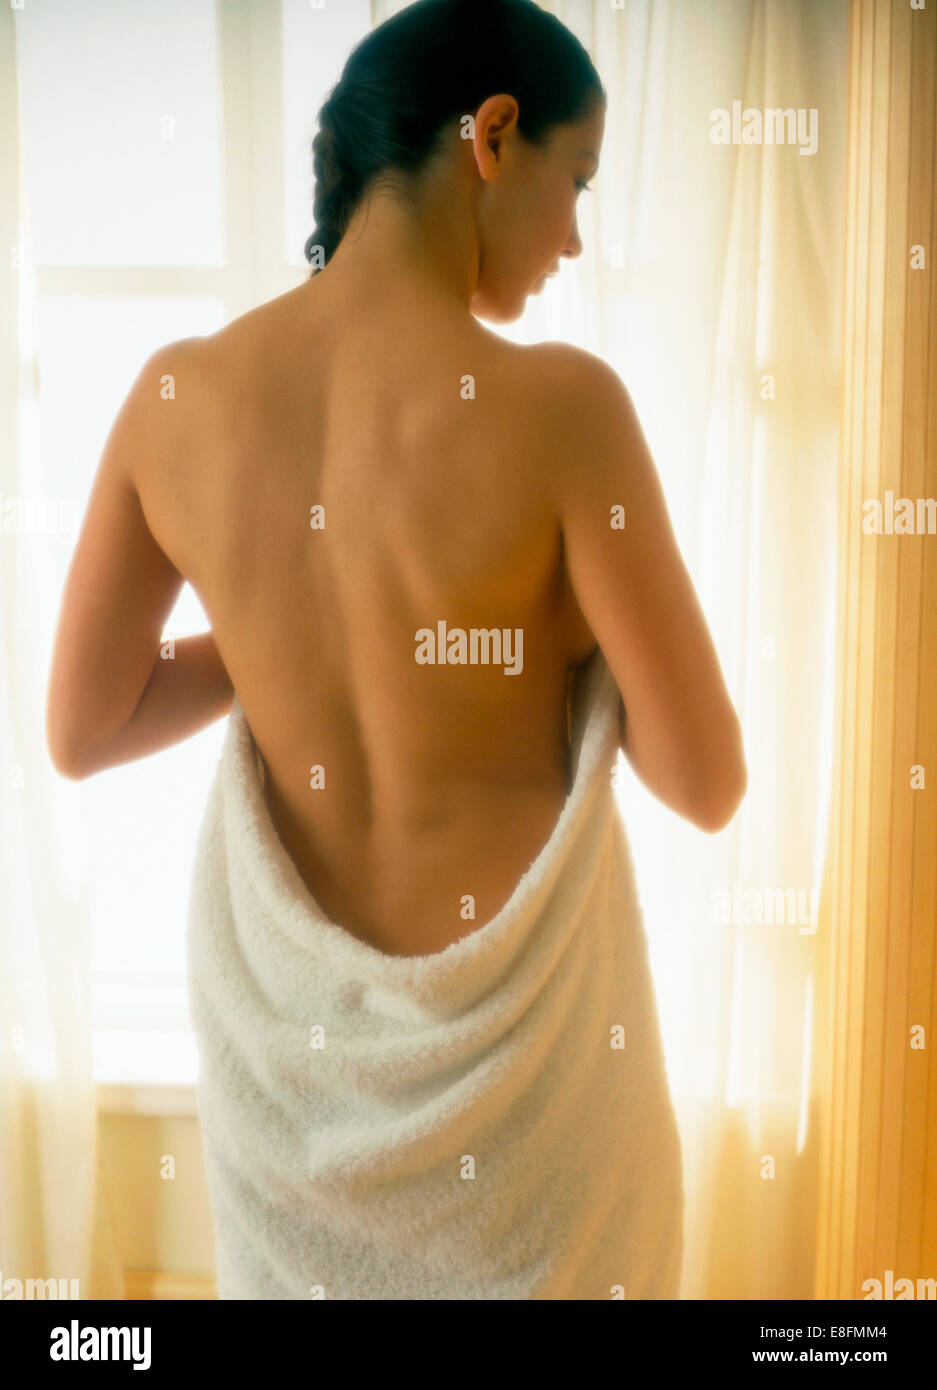 Rear view of woman Woman wrapped in towel Stock Photo